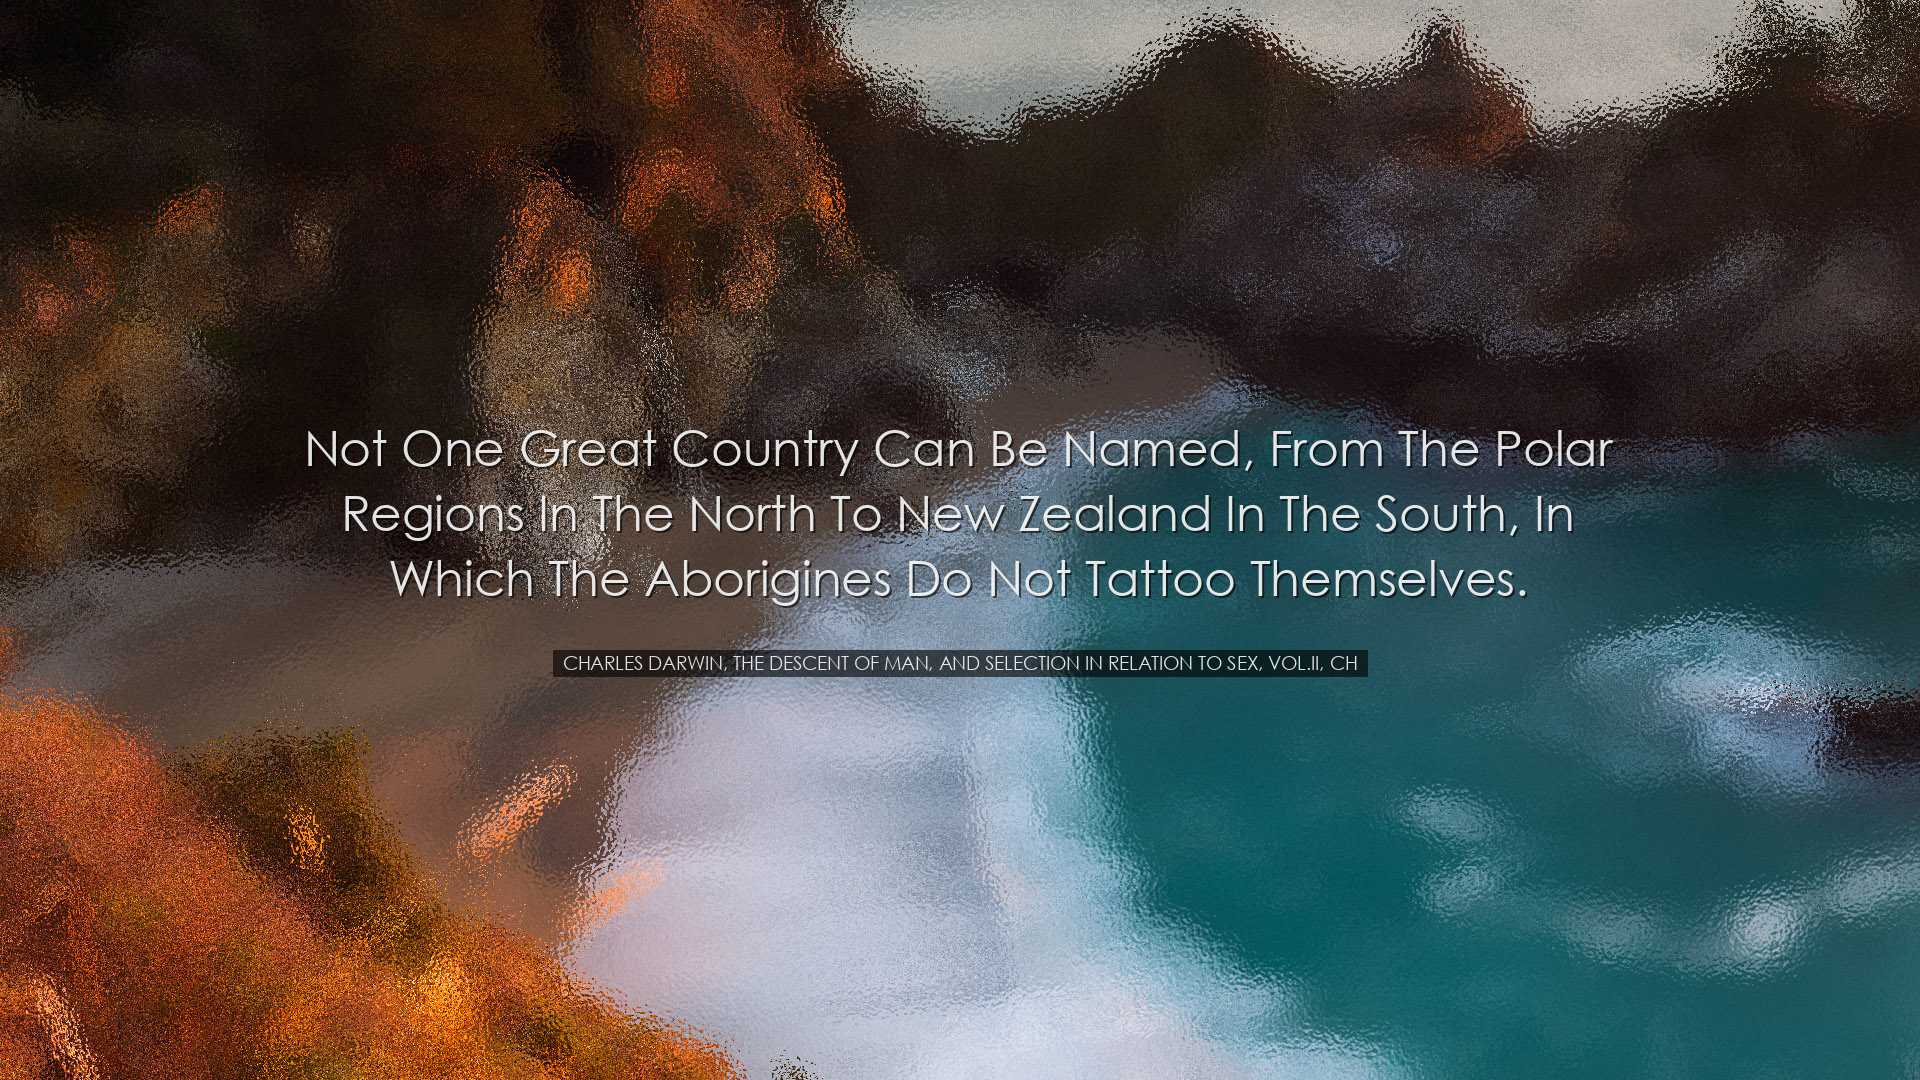 Not one great country can be named, from the Polar regions in the